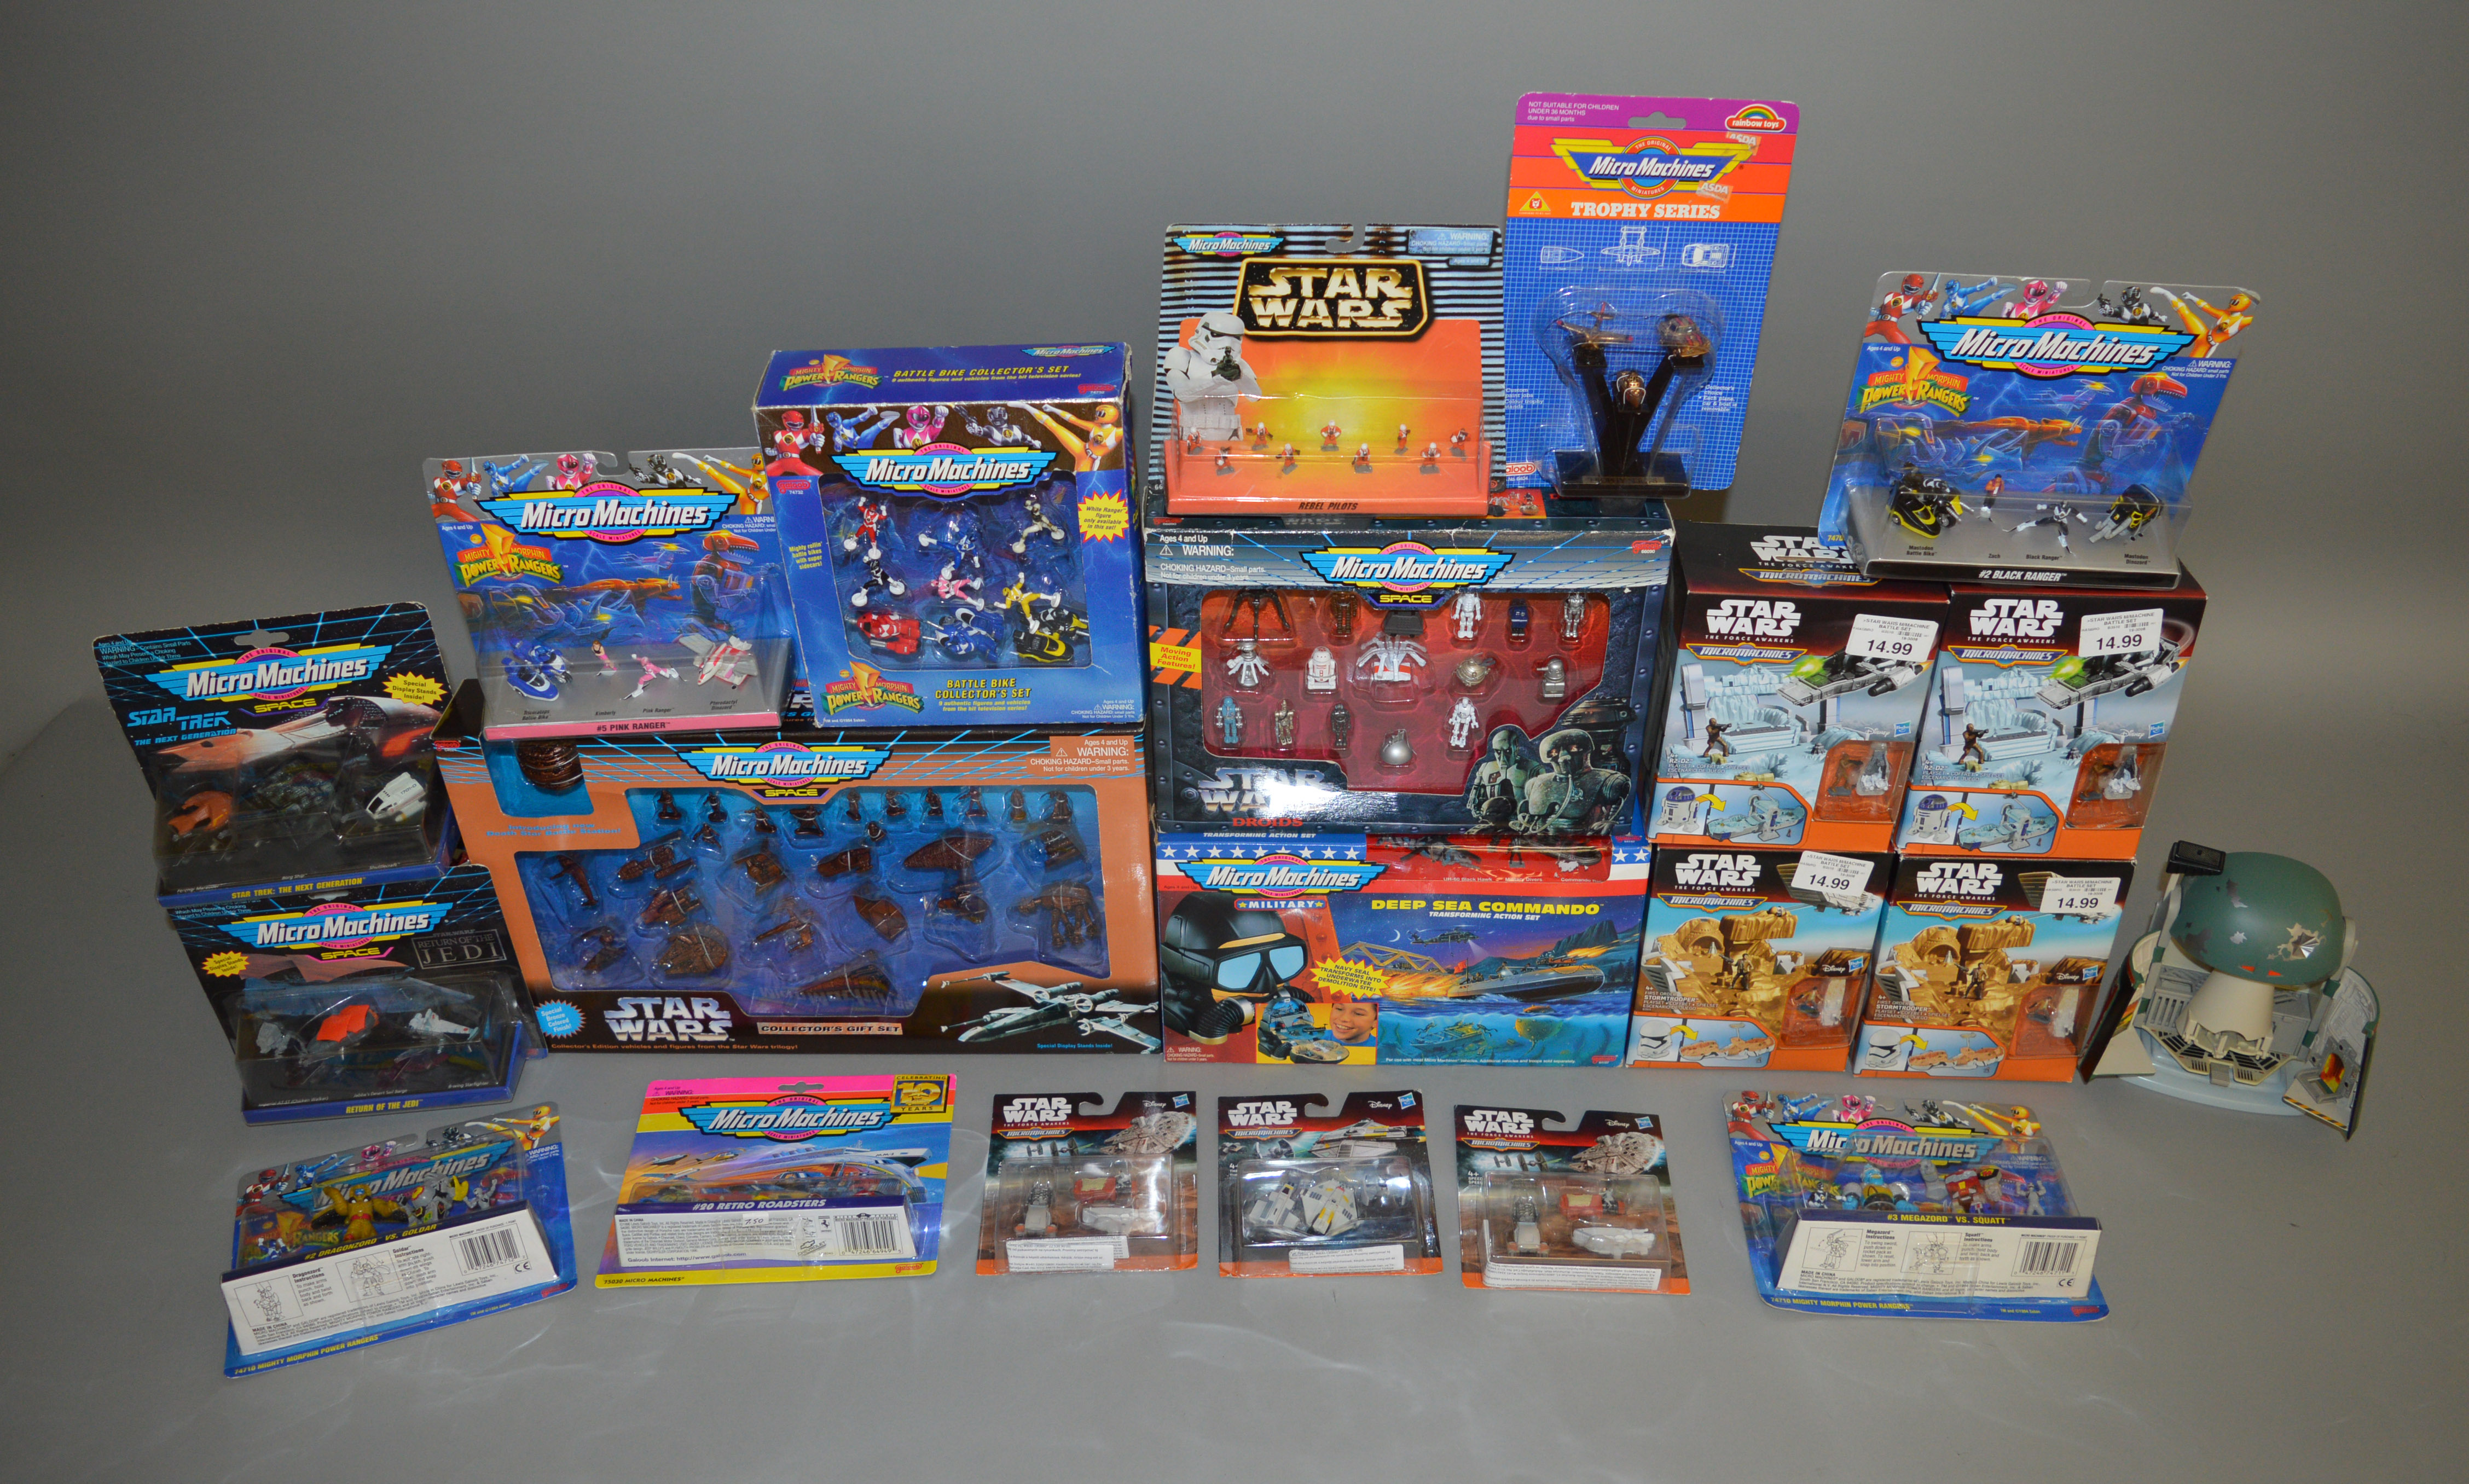 21 Micro Machines sets, mainly Star Wars themed (21).